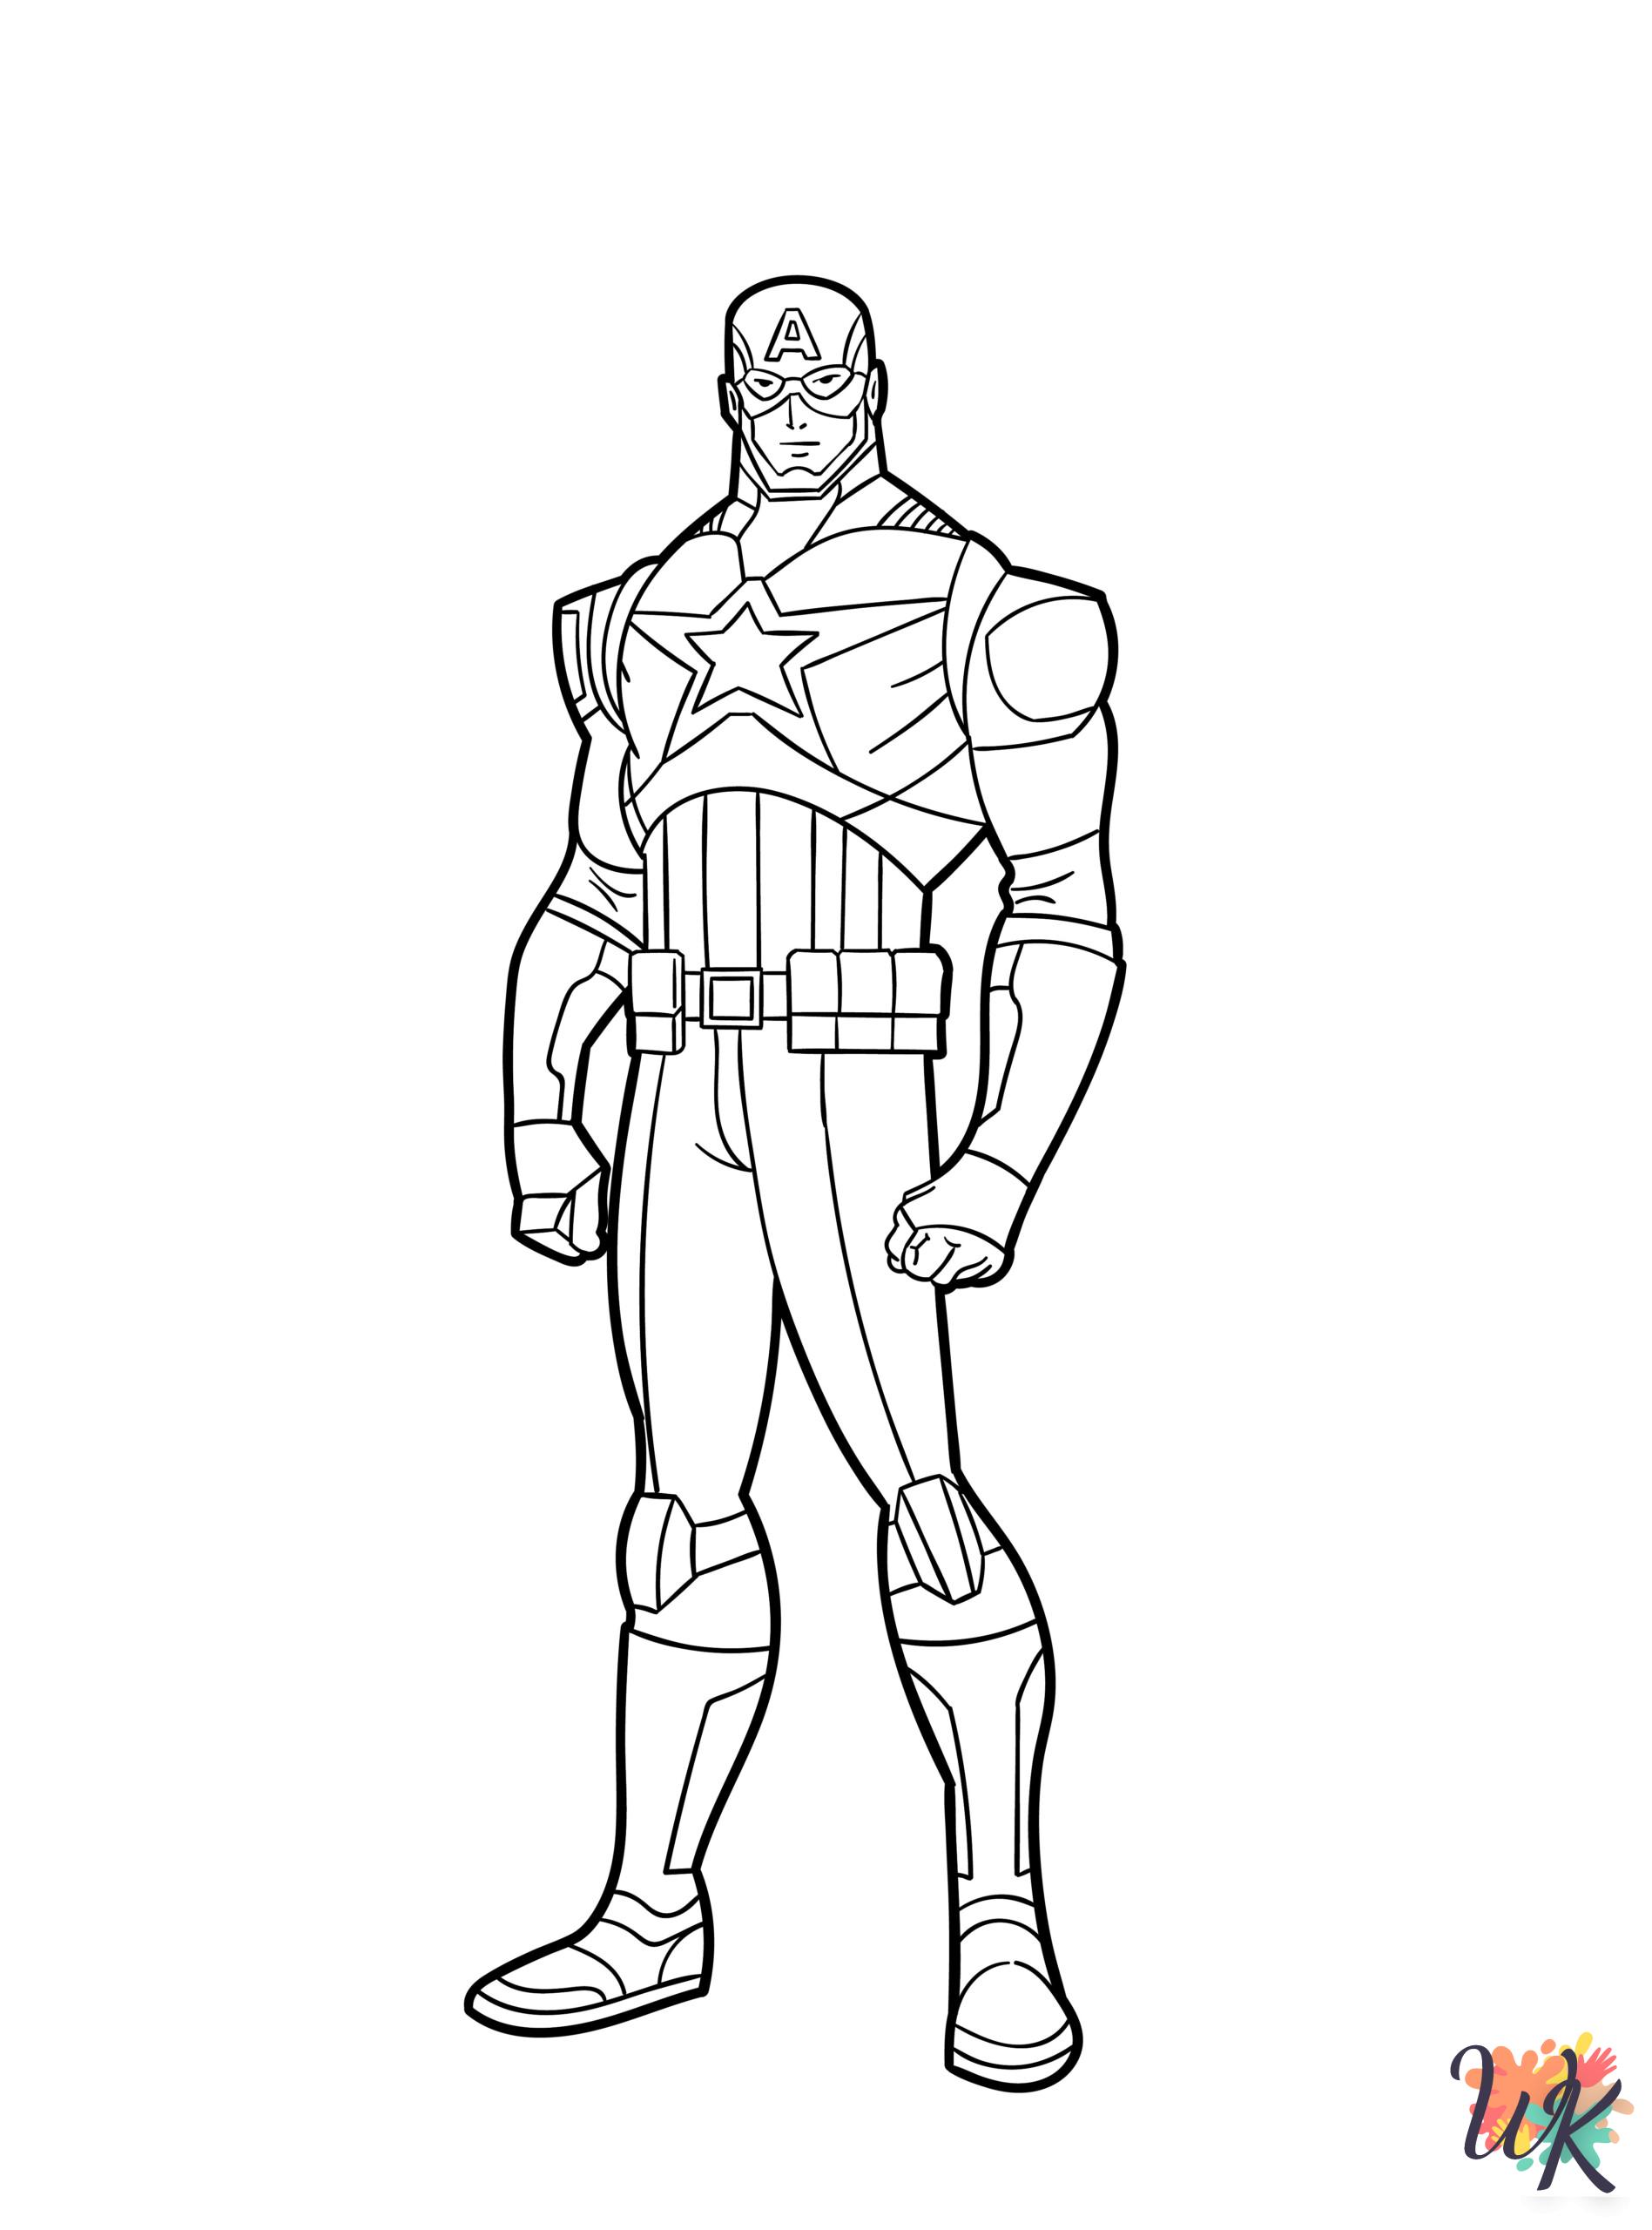 Captain America themed coloring pages